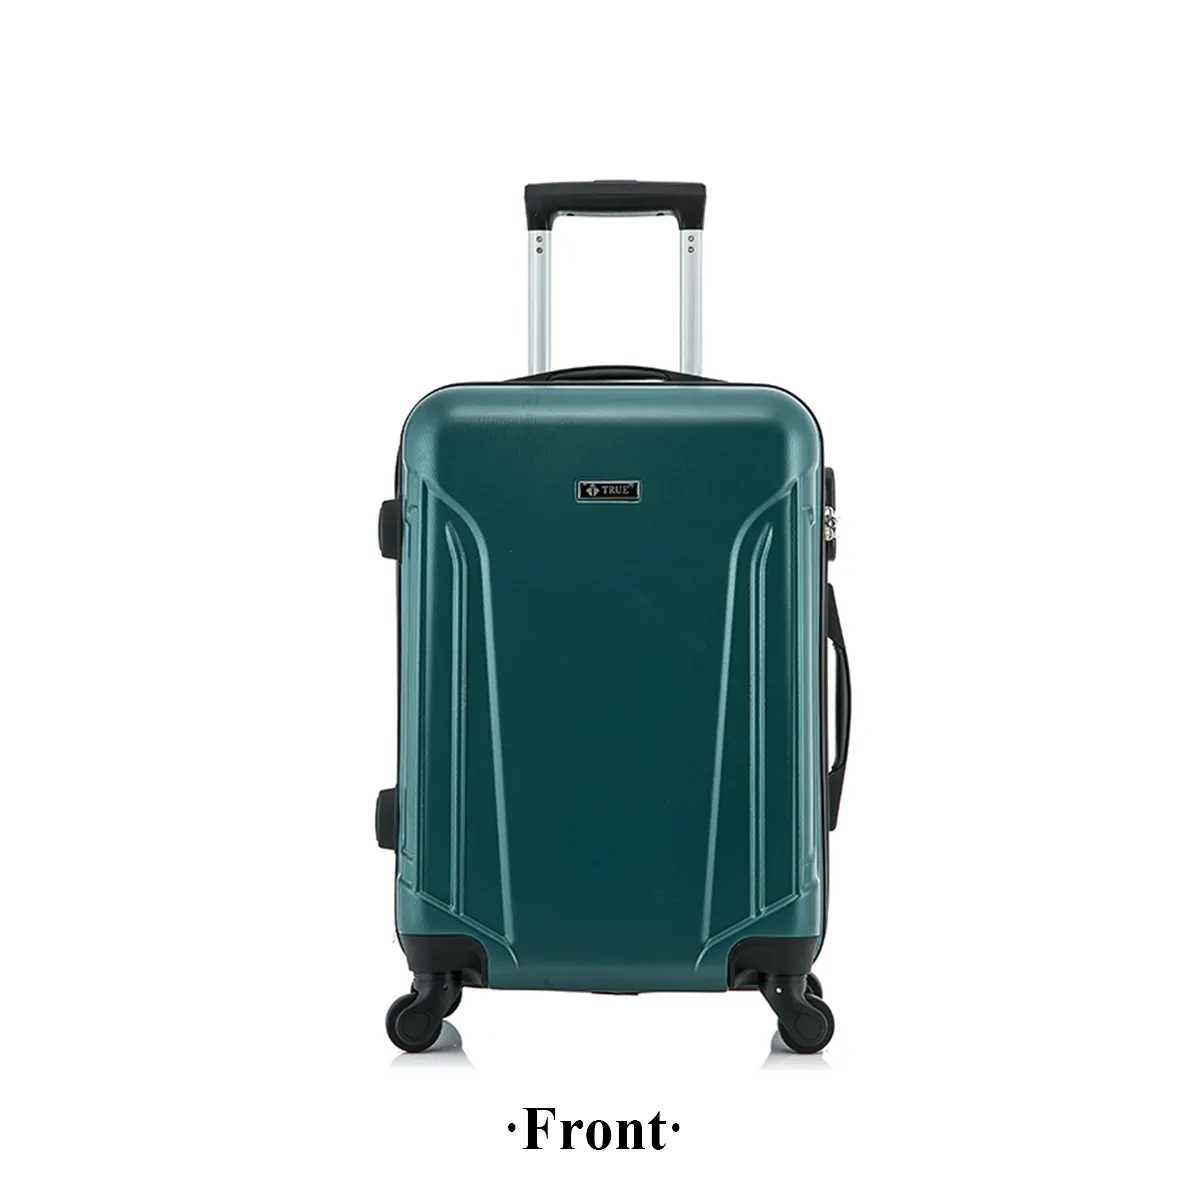 HIGH QUALITY UNISEX BUSINESS TRIP ABS TROLLEY SUITCASE LUGGAGE FOR MEN